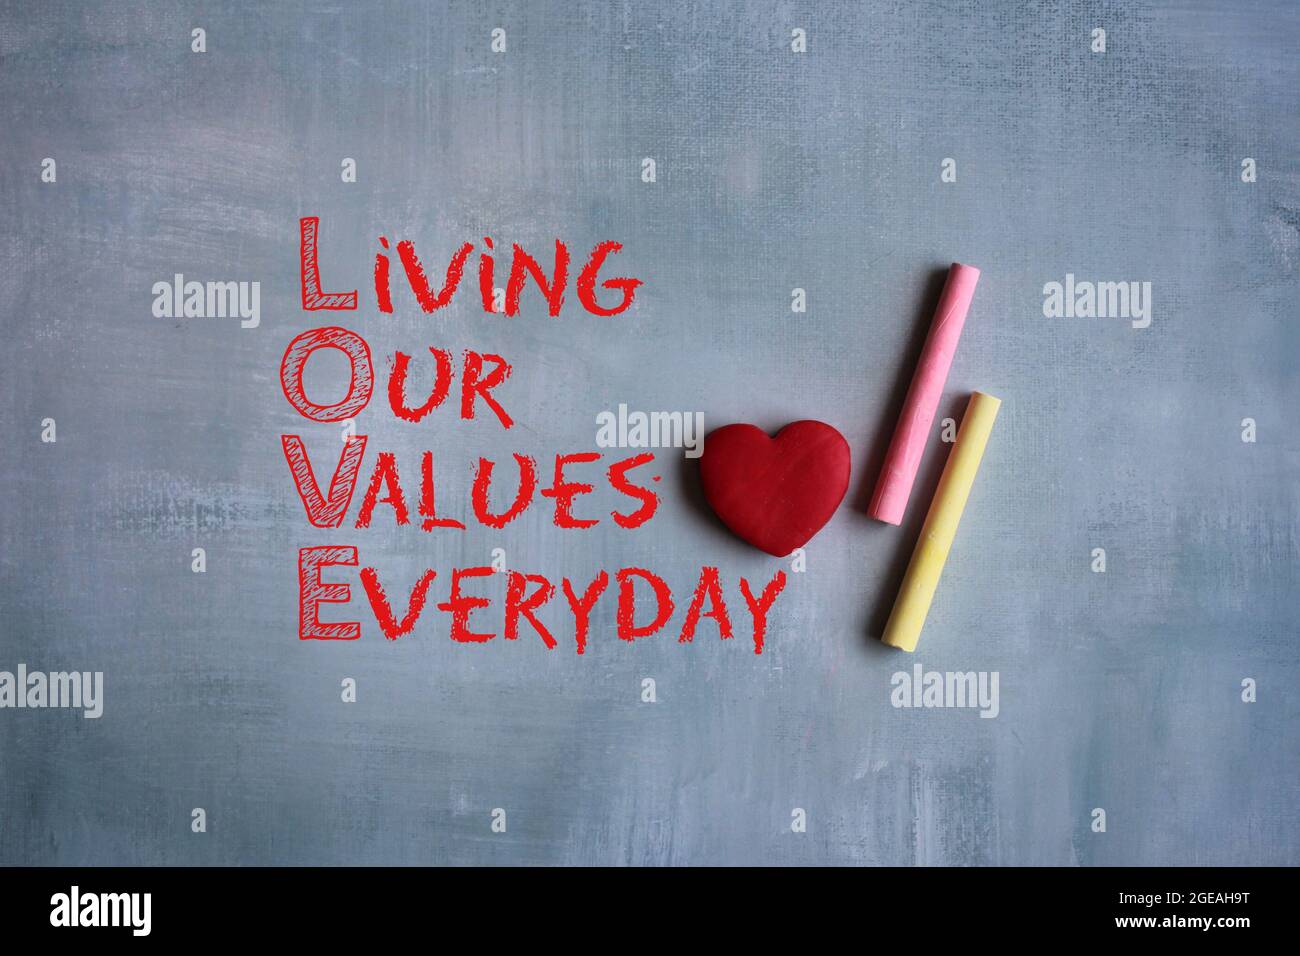 LOVE acronym - Living our values everyday, chalkboard and red heart on concrete cement Stock Photo